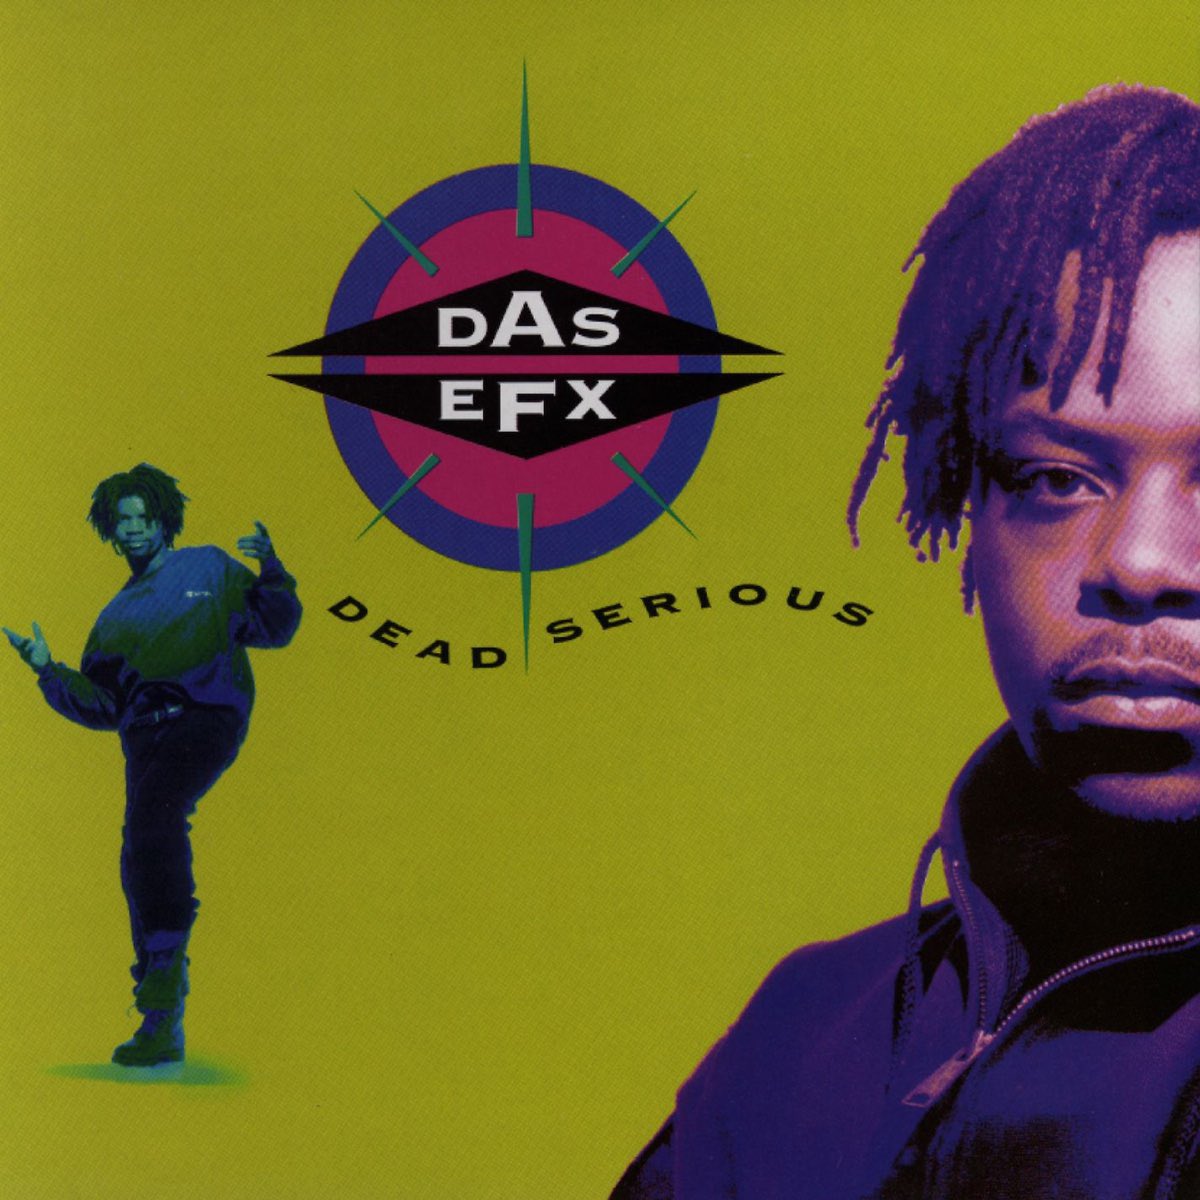 Happy 32nd birthday to Das EFX’s debut album “Dead Serious,” released on April 7, 1992! What was your jam from this album? #DasEFX #DeadSerious #DeadSerious32 #SoulBounce